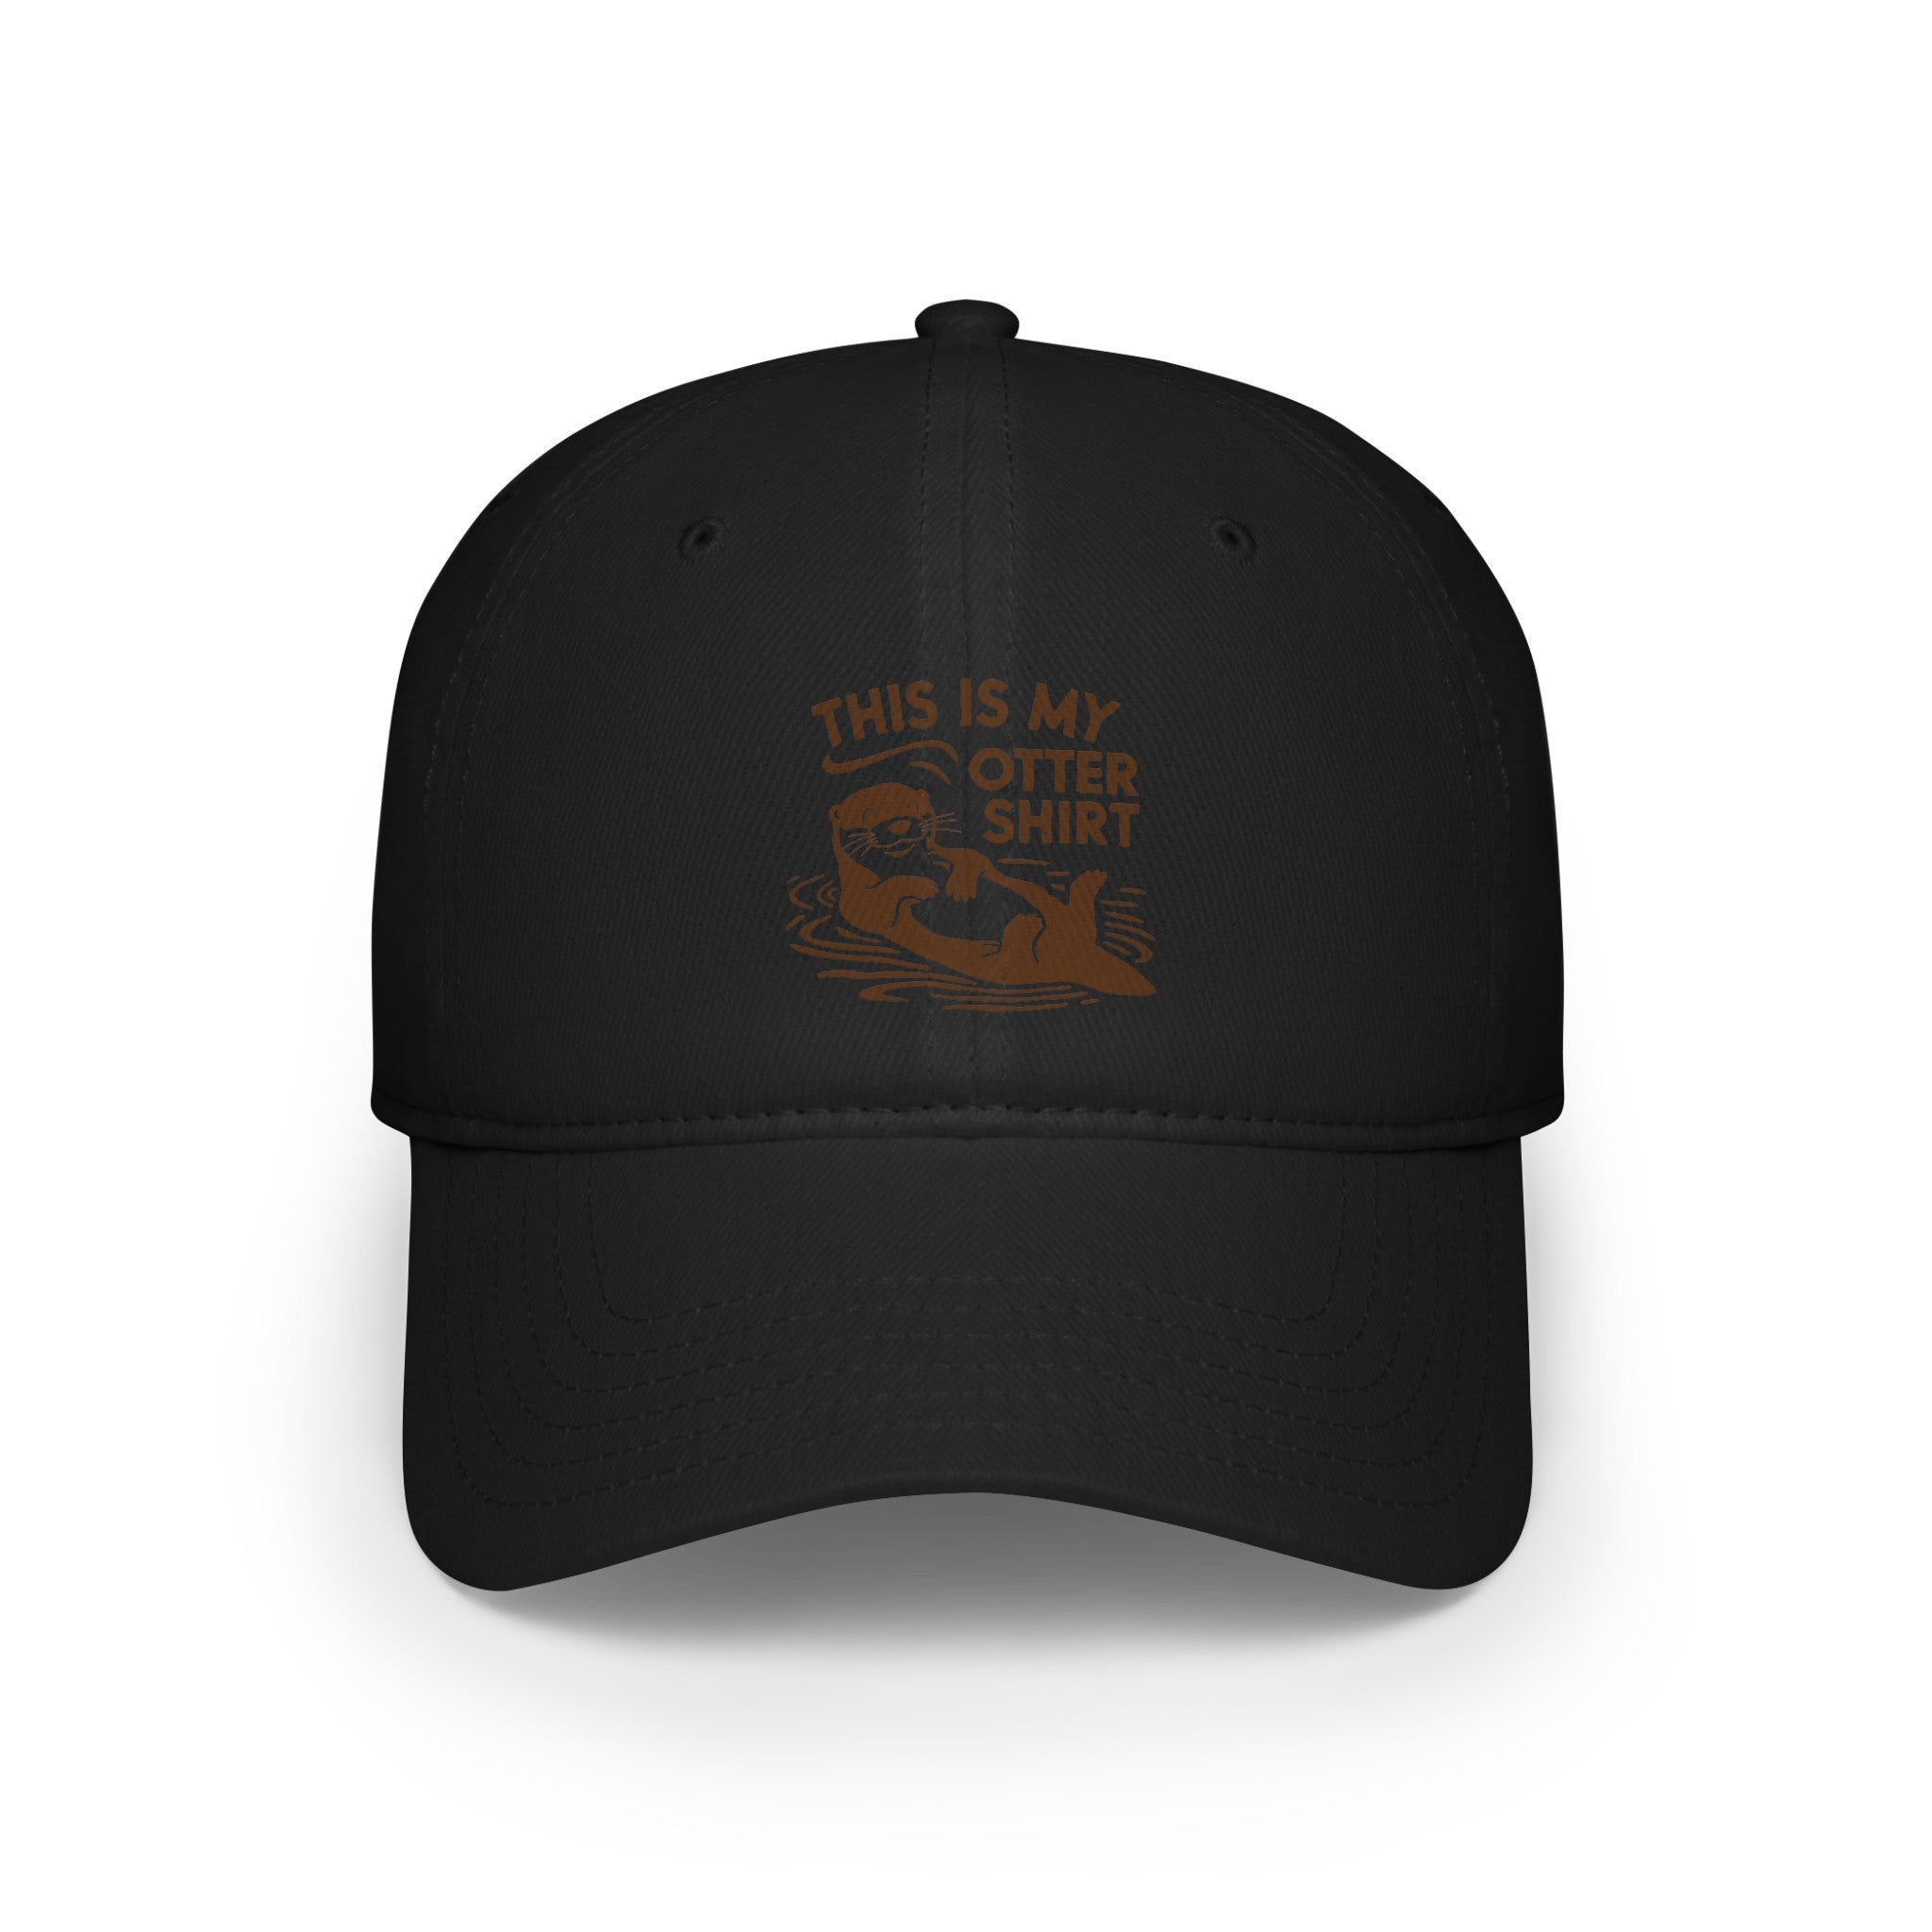 A black baseball cap with an illustration of an otter and the text, "This is my otter shirt," printed in brown on the front, offering unique style and exceptional comfort.